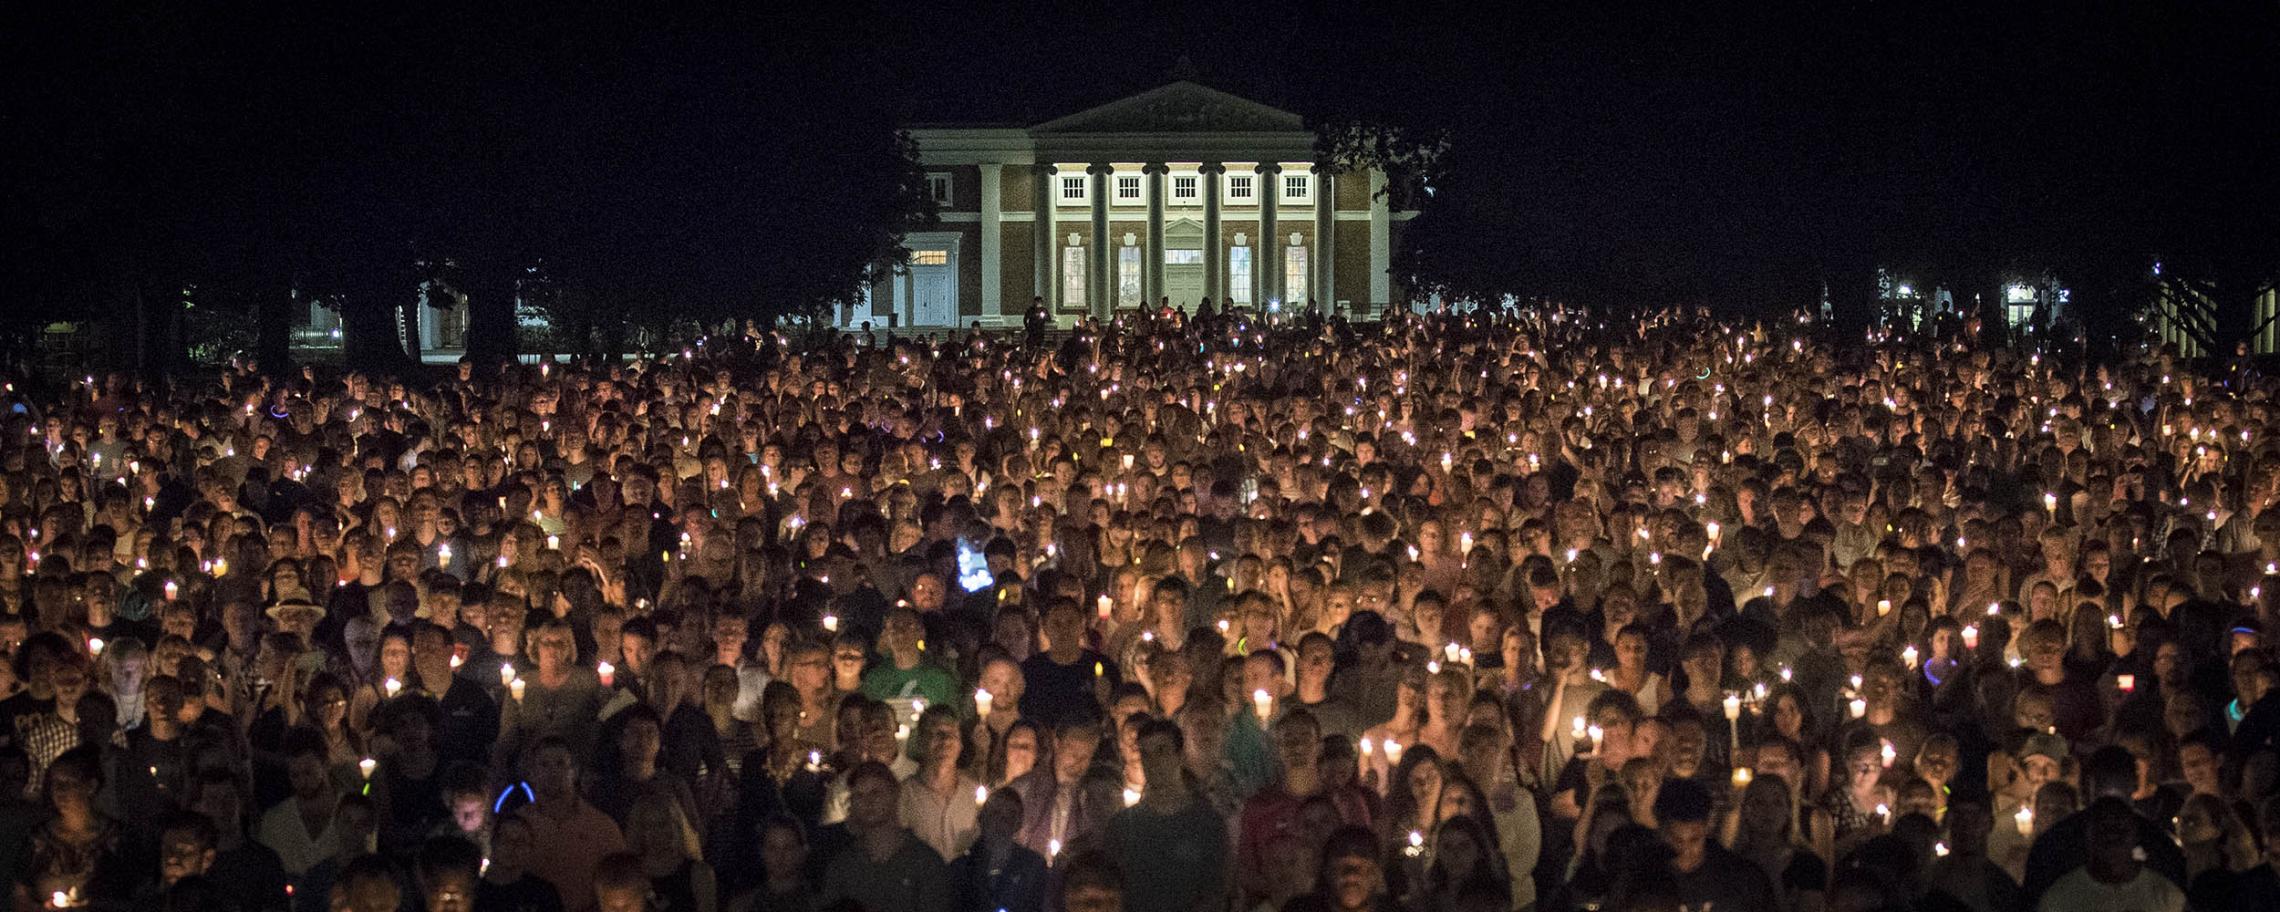 Thousands of people on the Lawn holding candles while attended a vigil